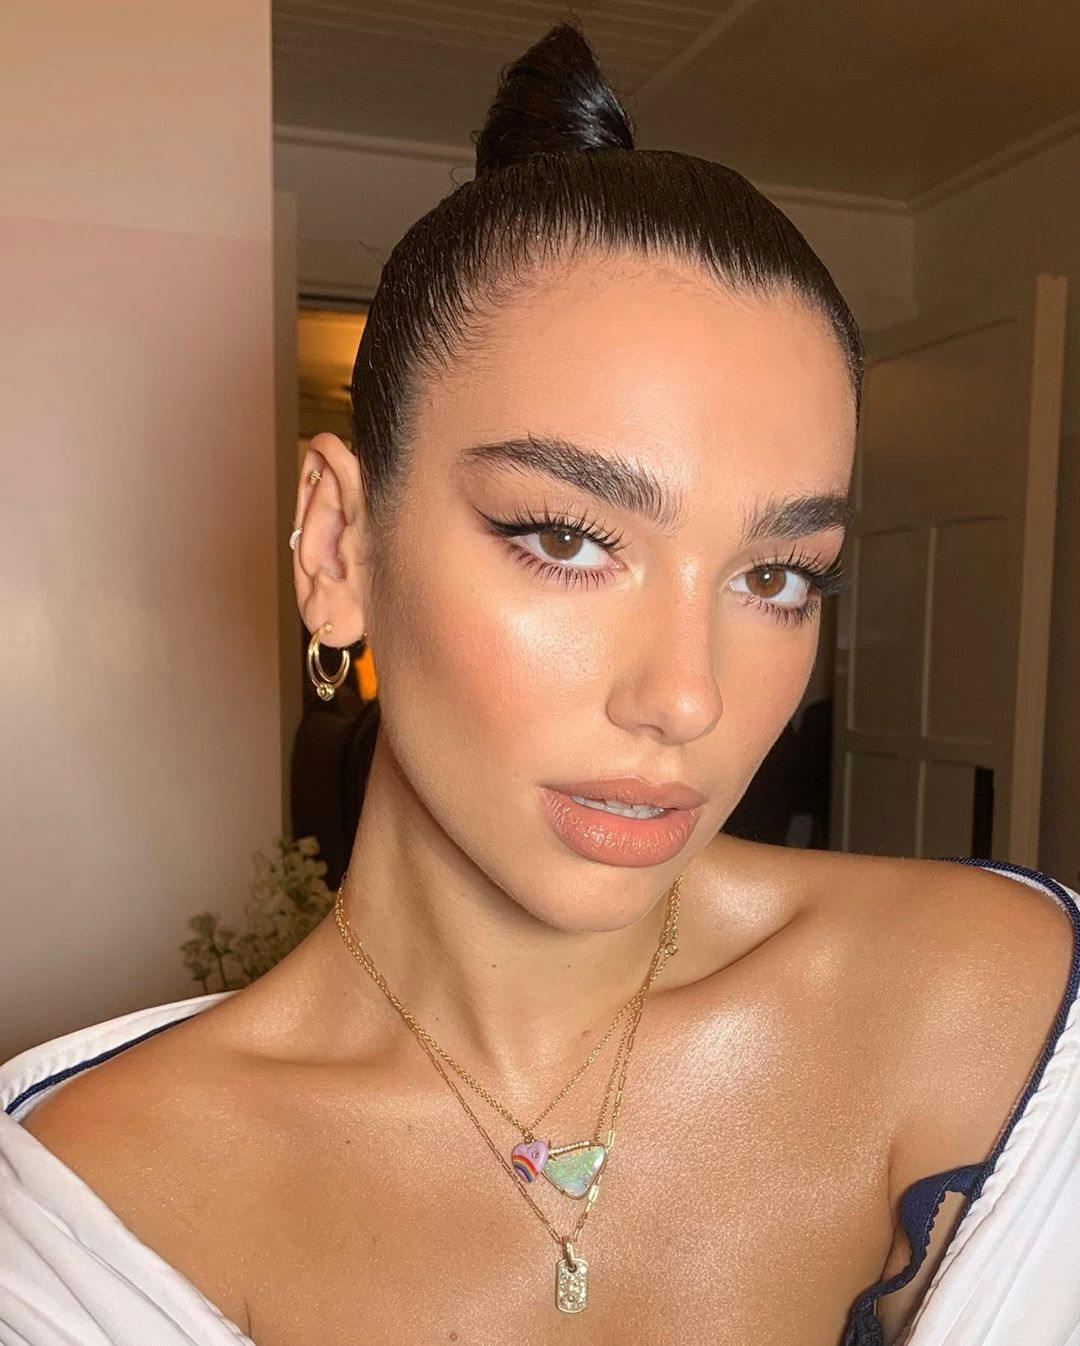 How to Get the Instagram-Favorite Soap Brow Trend - Feathered Eyebrows  Beauty Trend